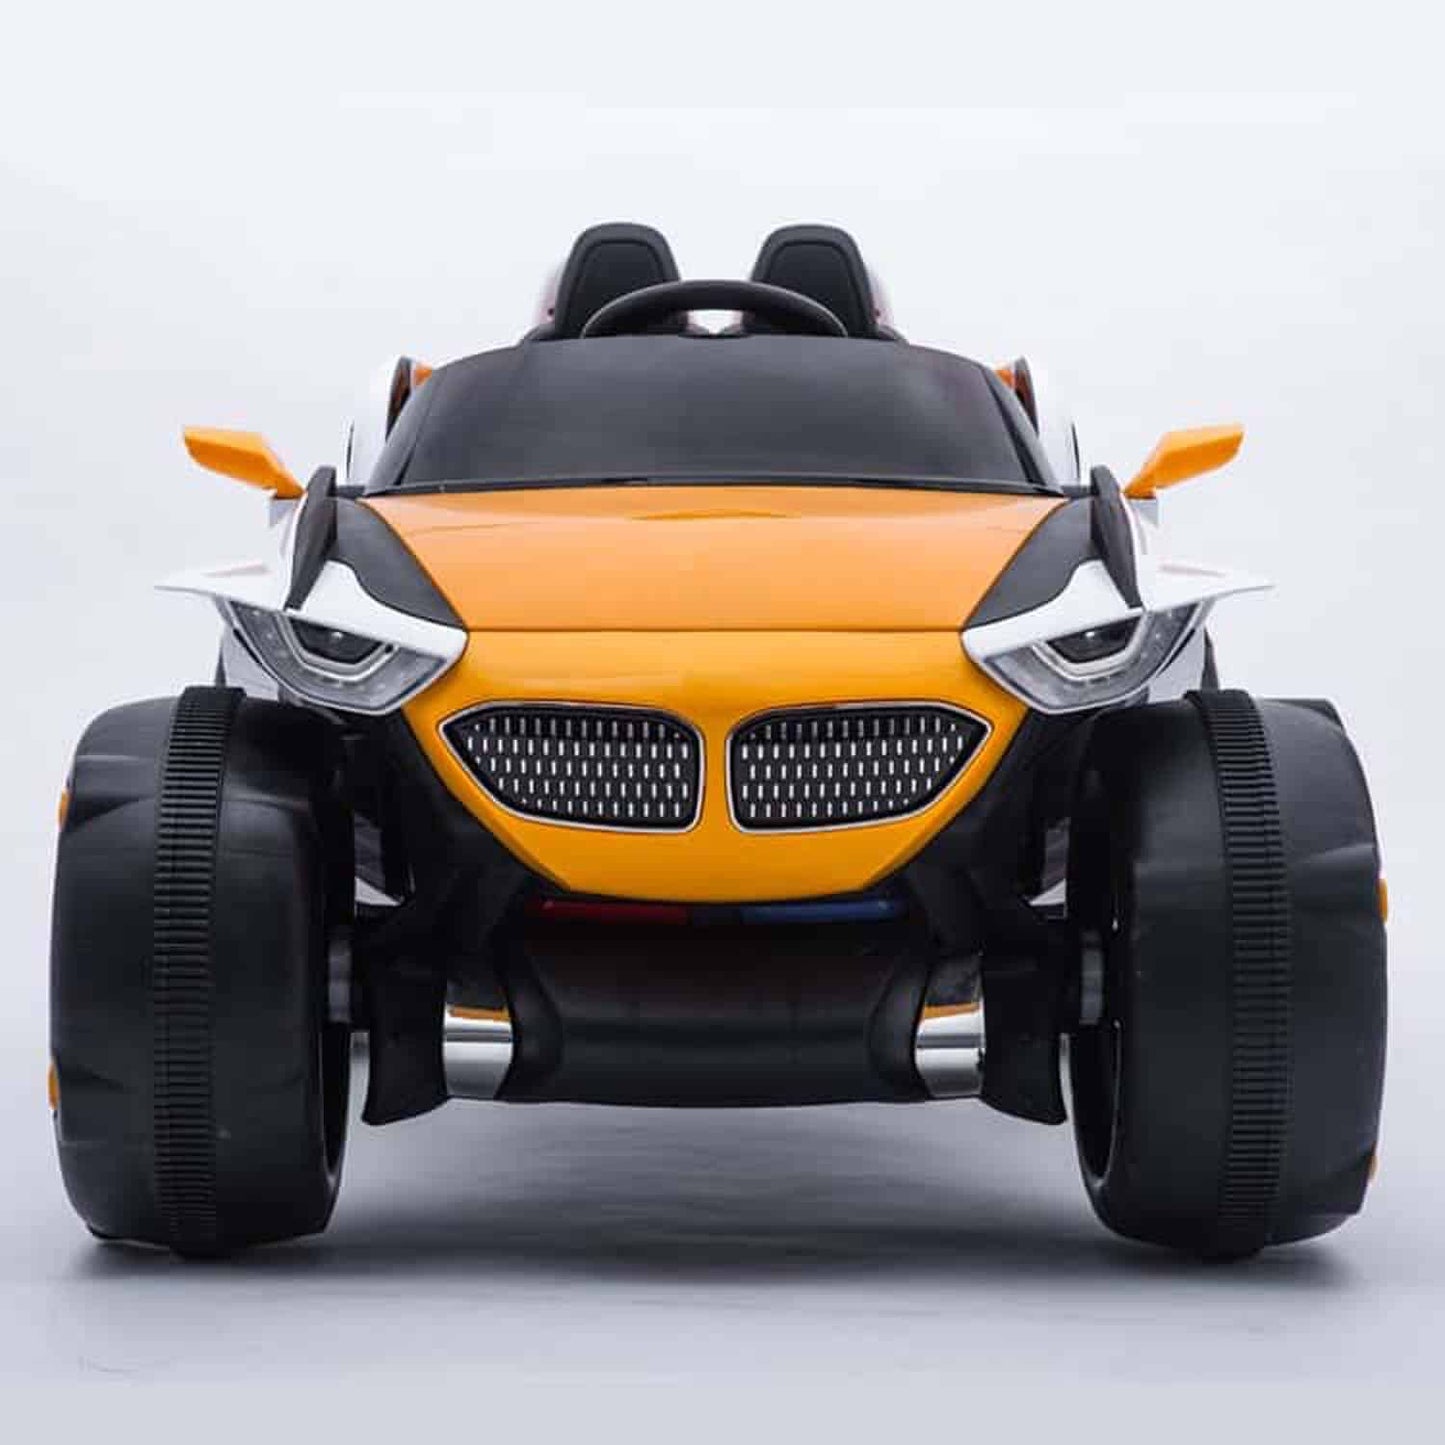 Big Size 2 seater Jeep Ride On Dual Seater Kids Car XJL-688